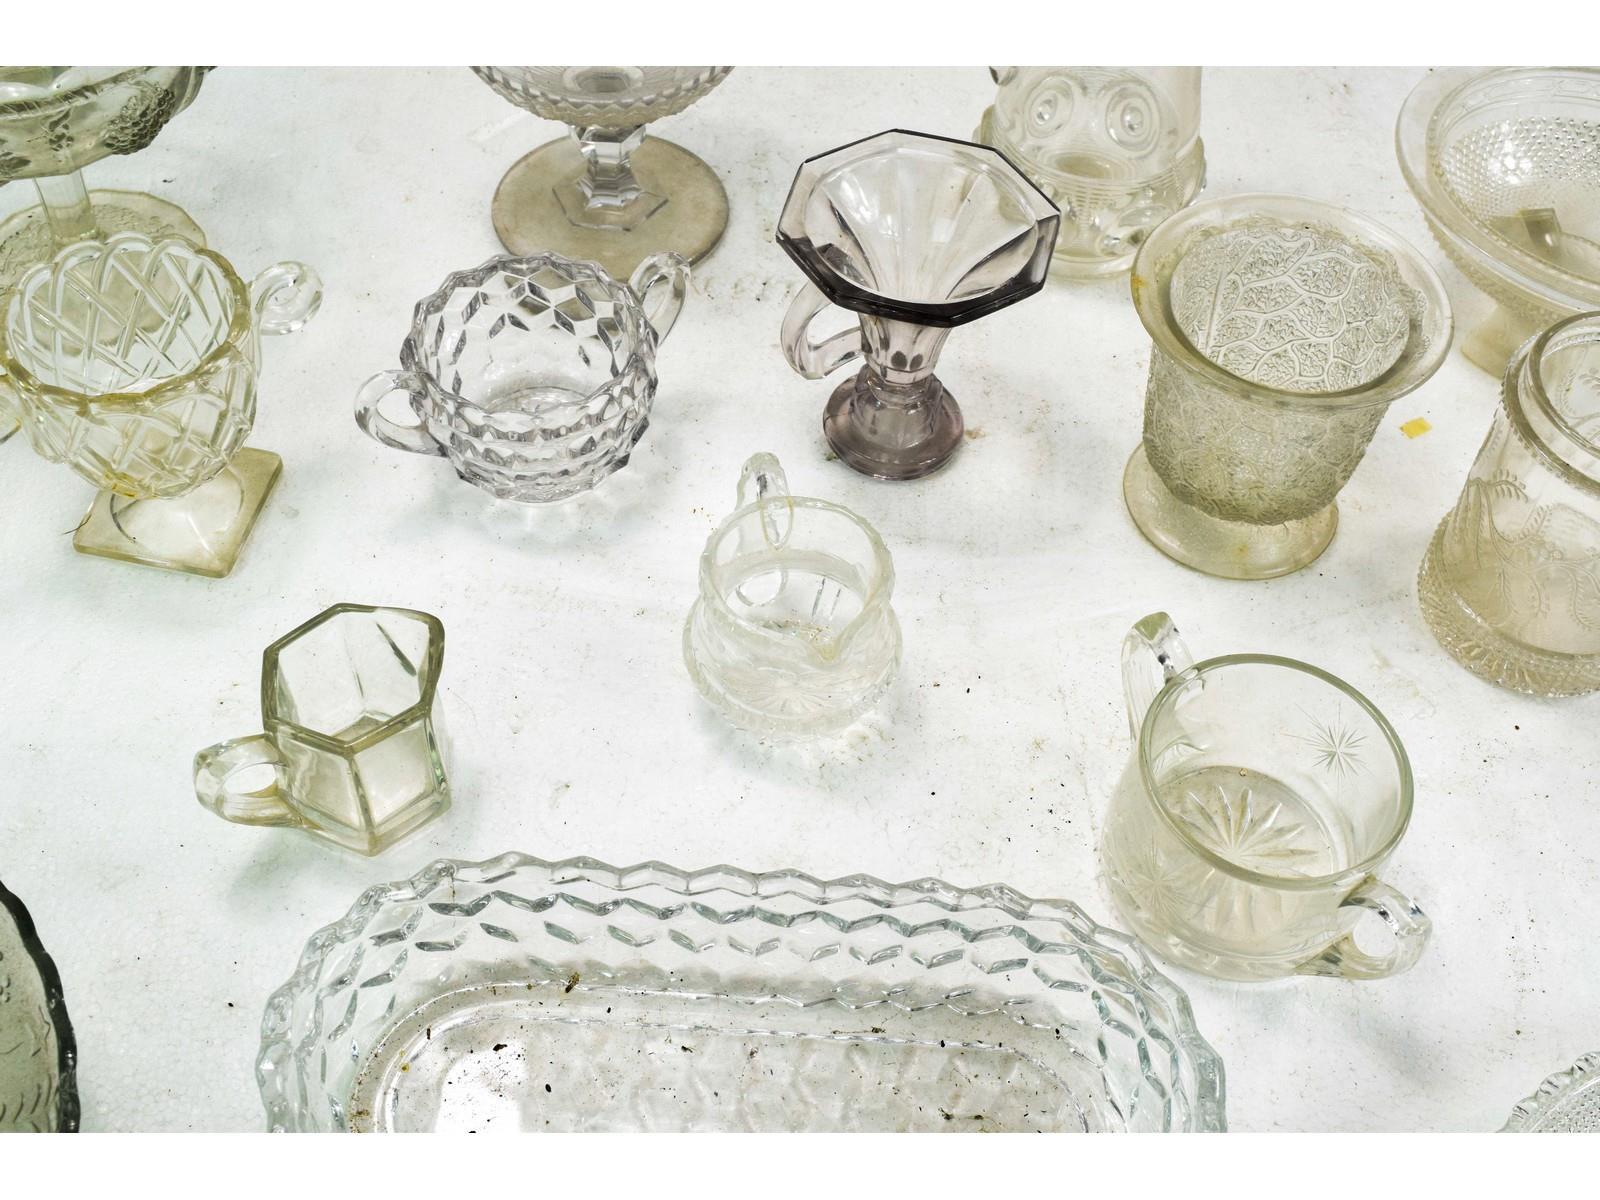 Lot of Pressed/Cut Glass Items 22 Pieces